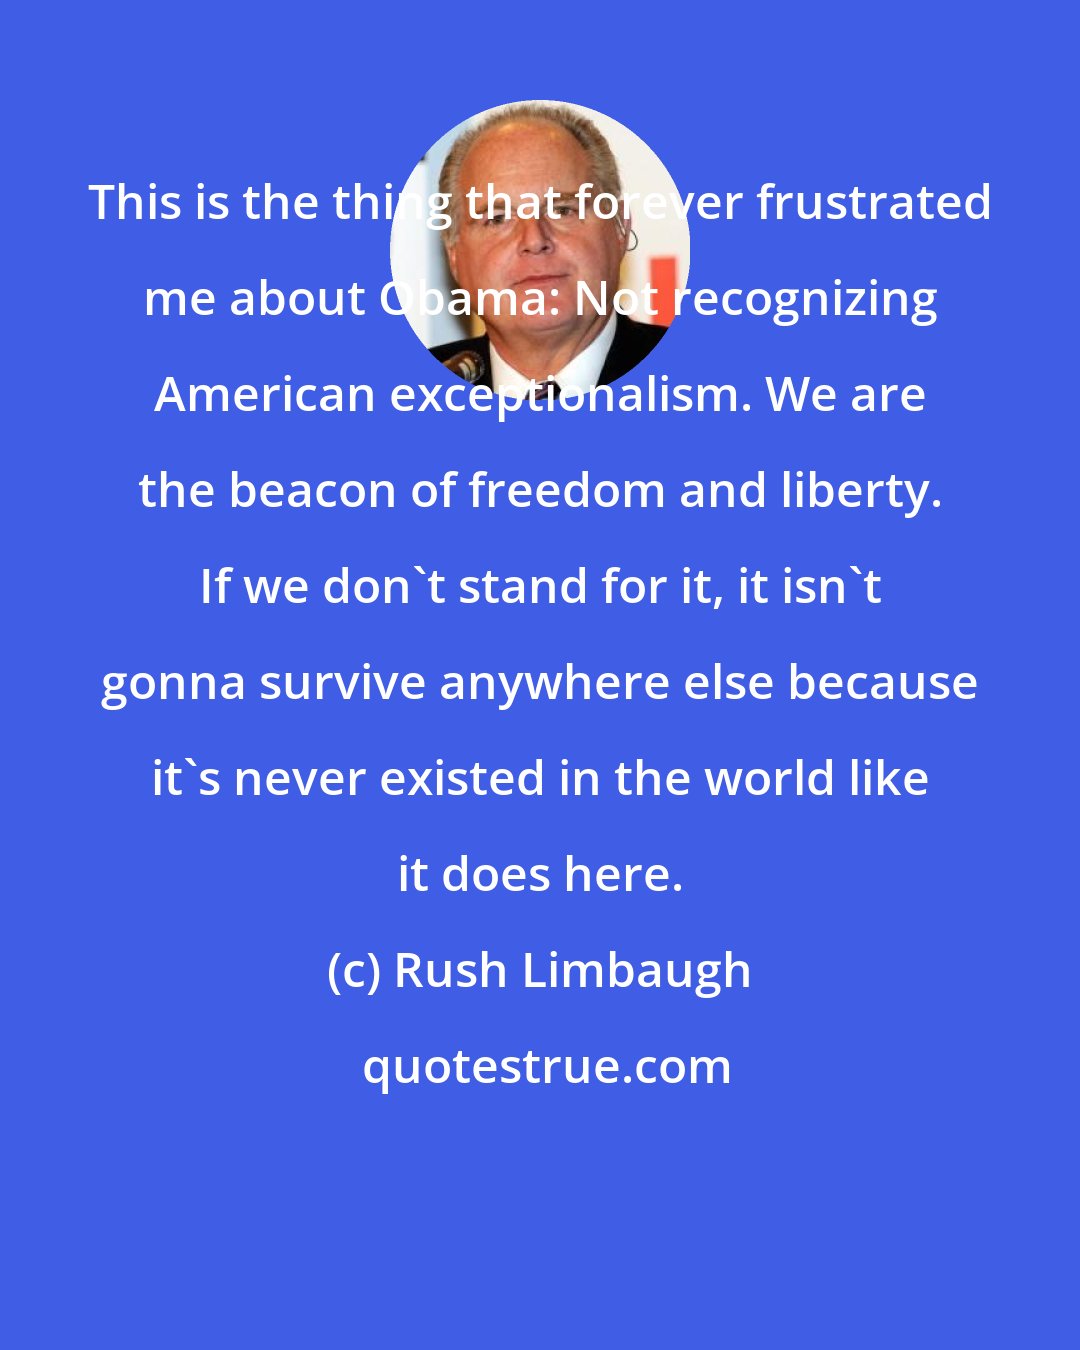 Rush Limbaugh: This is the thing that forever frustrated me about Obama: Not recognizing American exceptionalism. We are the beacon of freedom and liberty. If we don't stand for it, it isn't gonna survive anywhere else because it's never existed in the world like it does here.